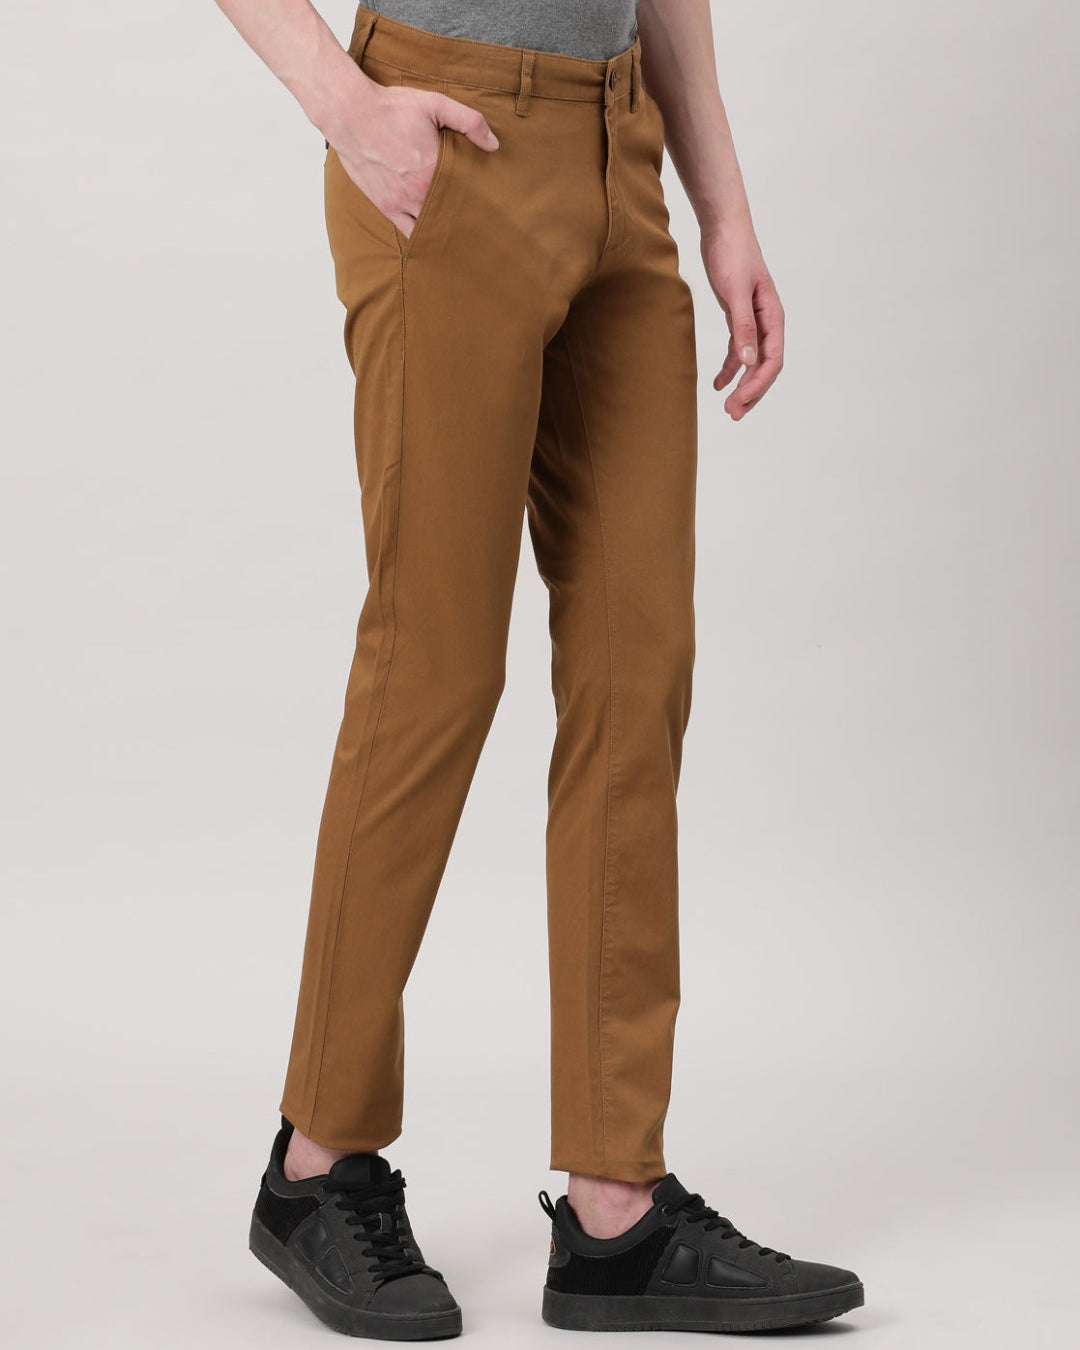 Casual Trim Fit Solid Khaki Trousers for Men